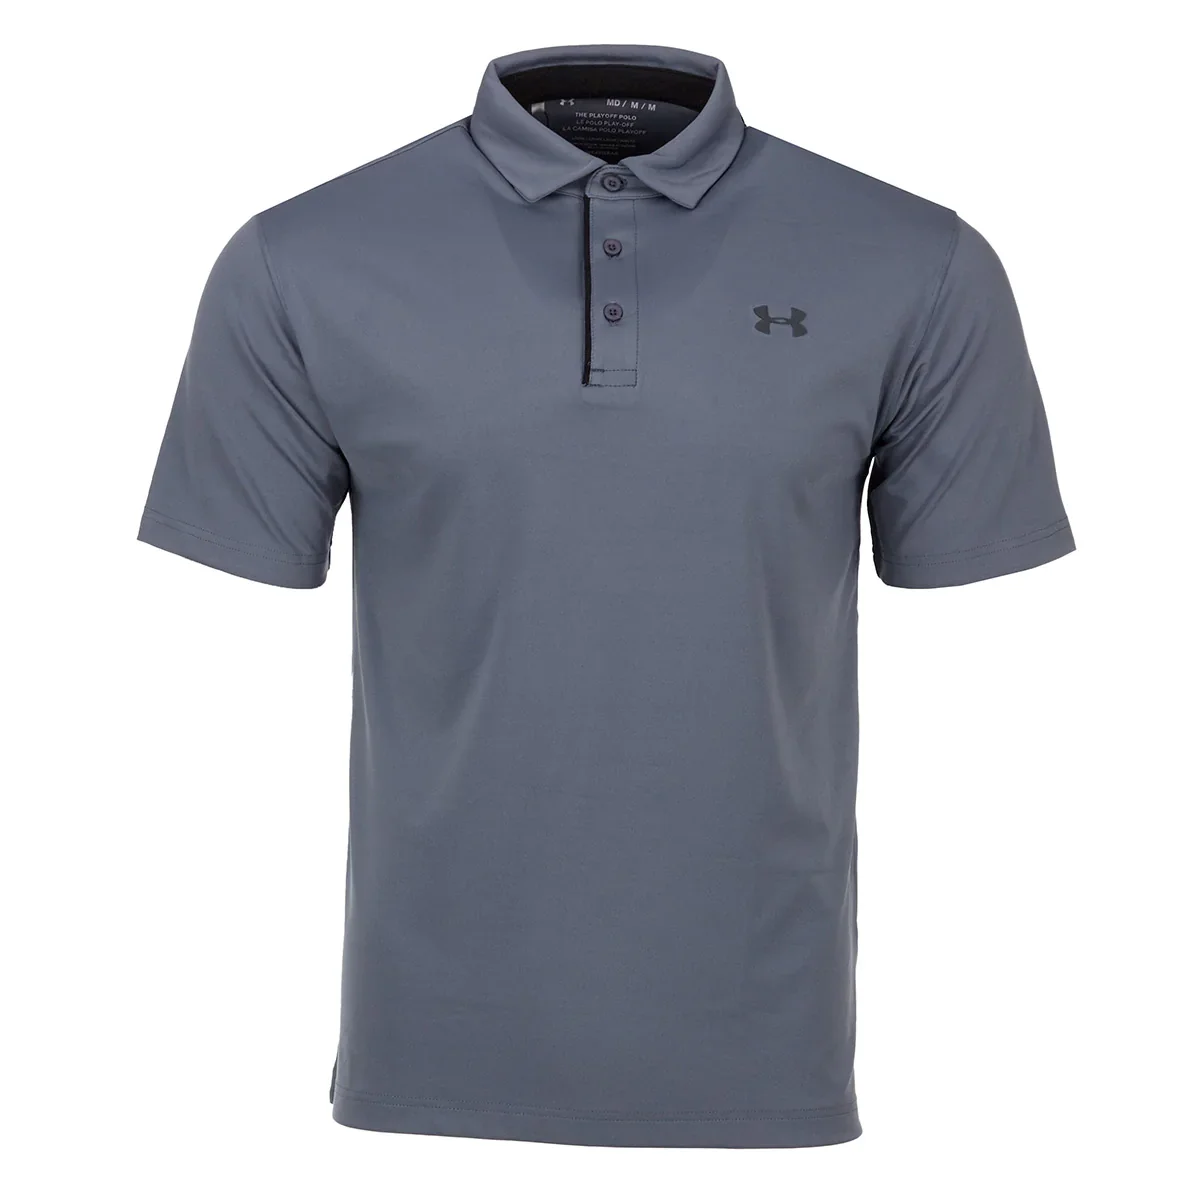 Image of Under Armour Men's Solid Playoff Polo